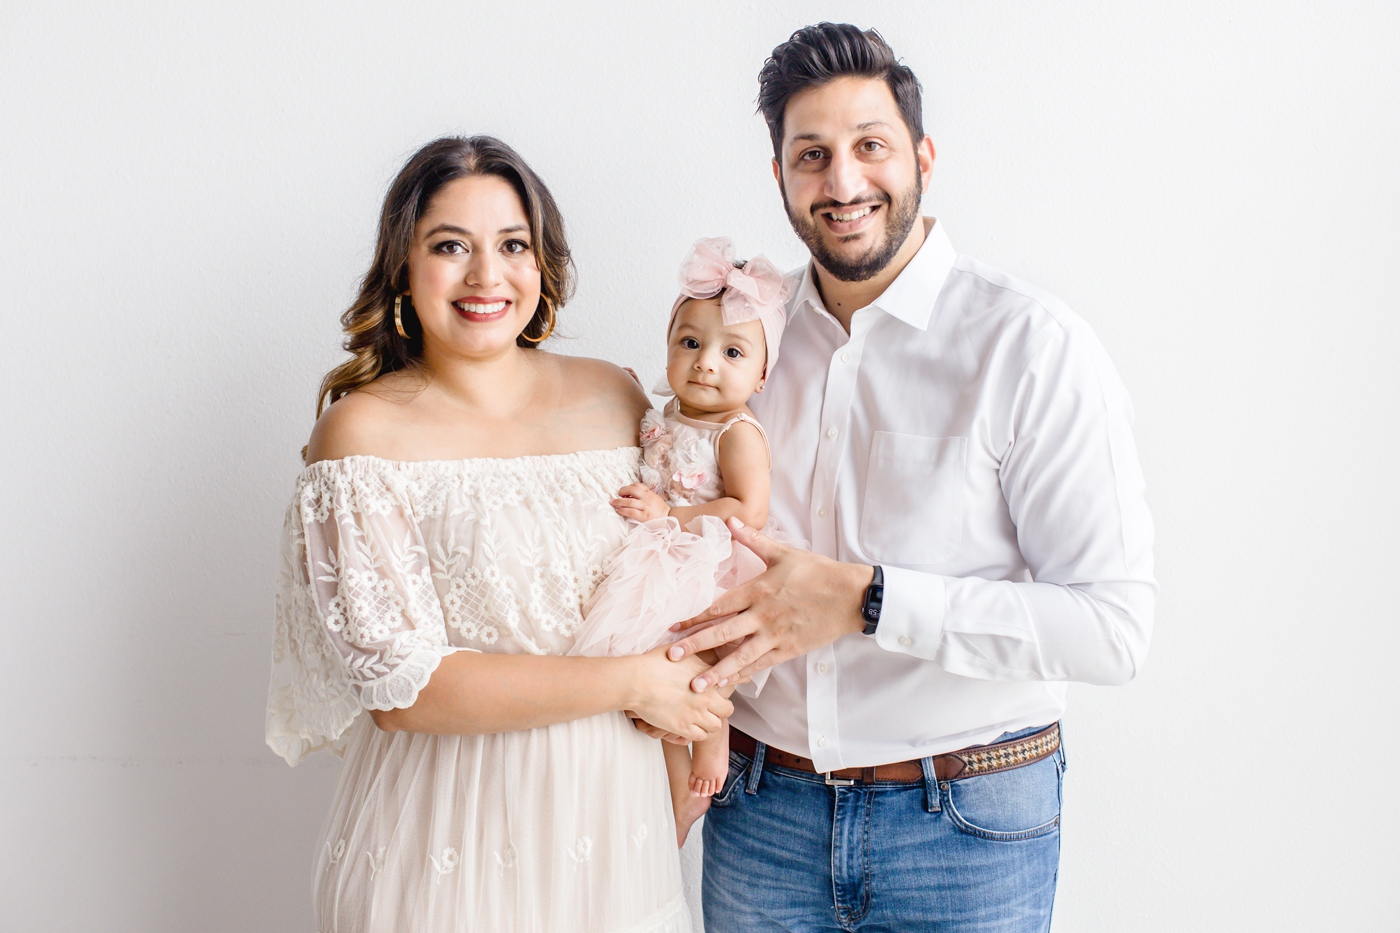 Mom, Dad and baby smiling at camera during studio family session. Photo by Sana Ahmed Photography.